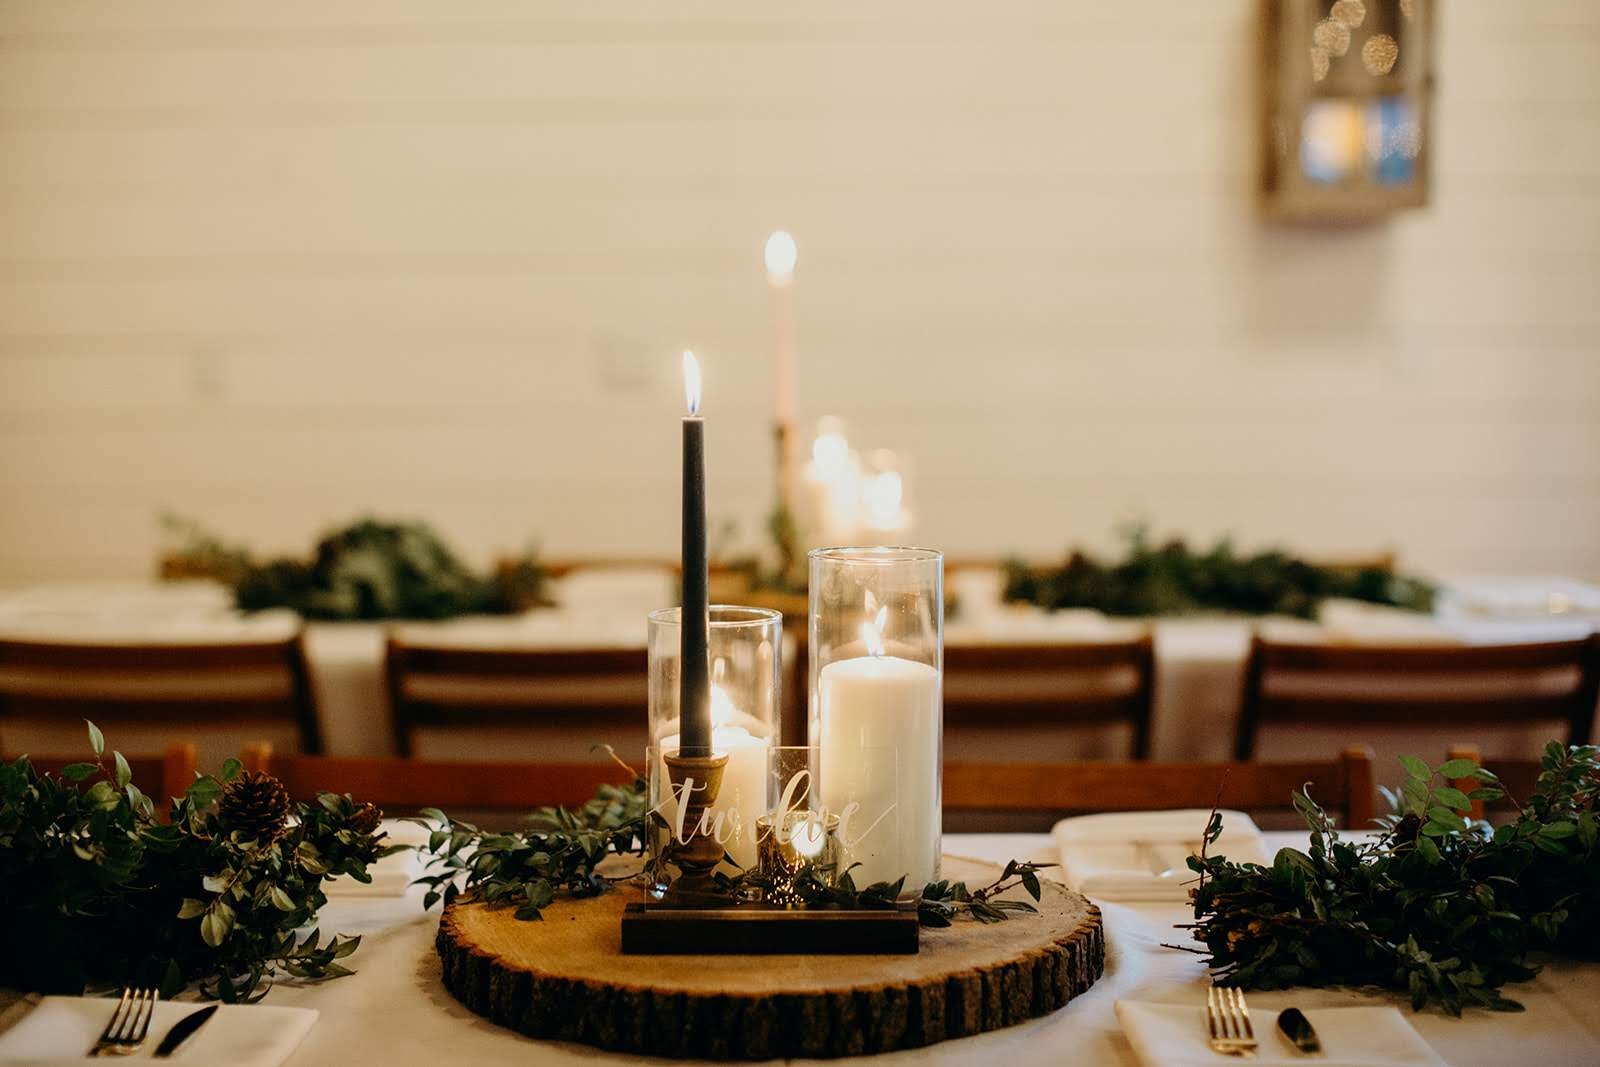 The greenery garlands created a lush look on the tables with glowing candlelight.